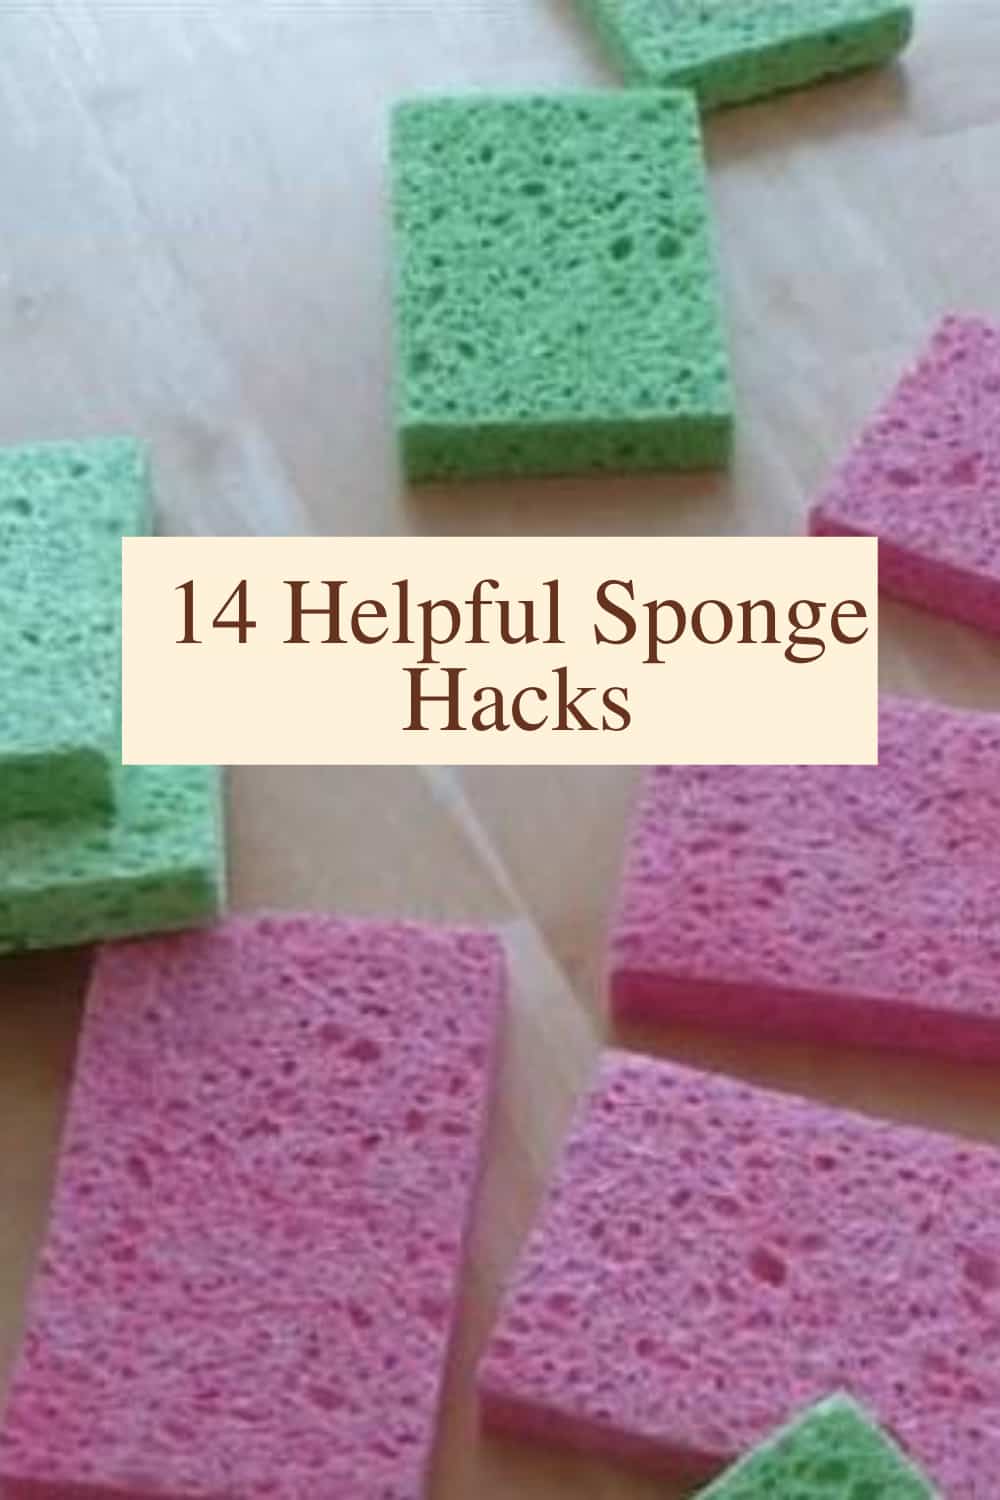 14 Crazy Cleaning Sponge Hacks & How To Clean It